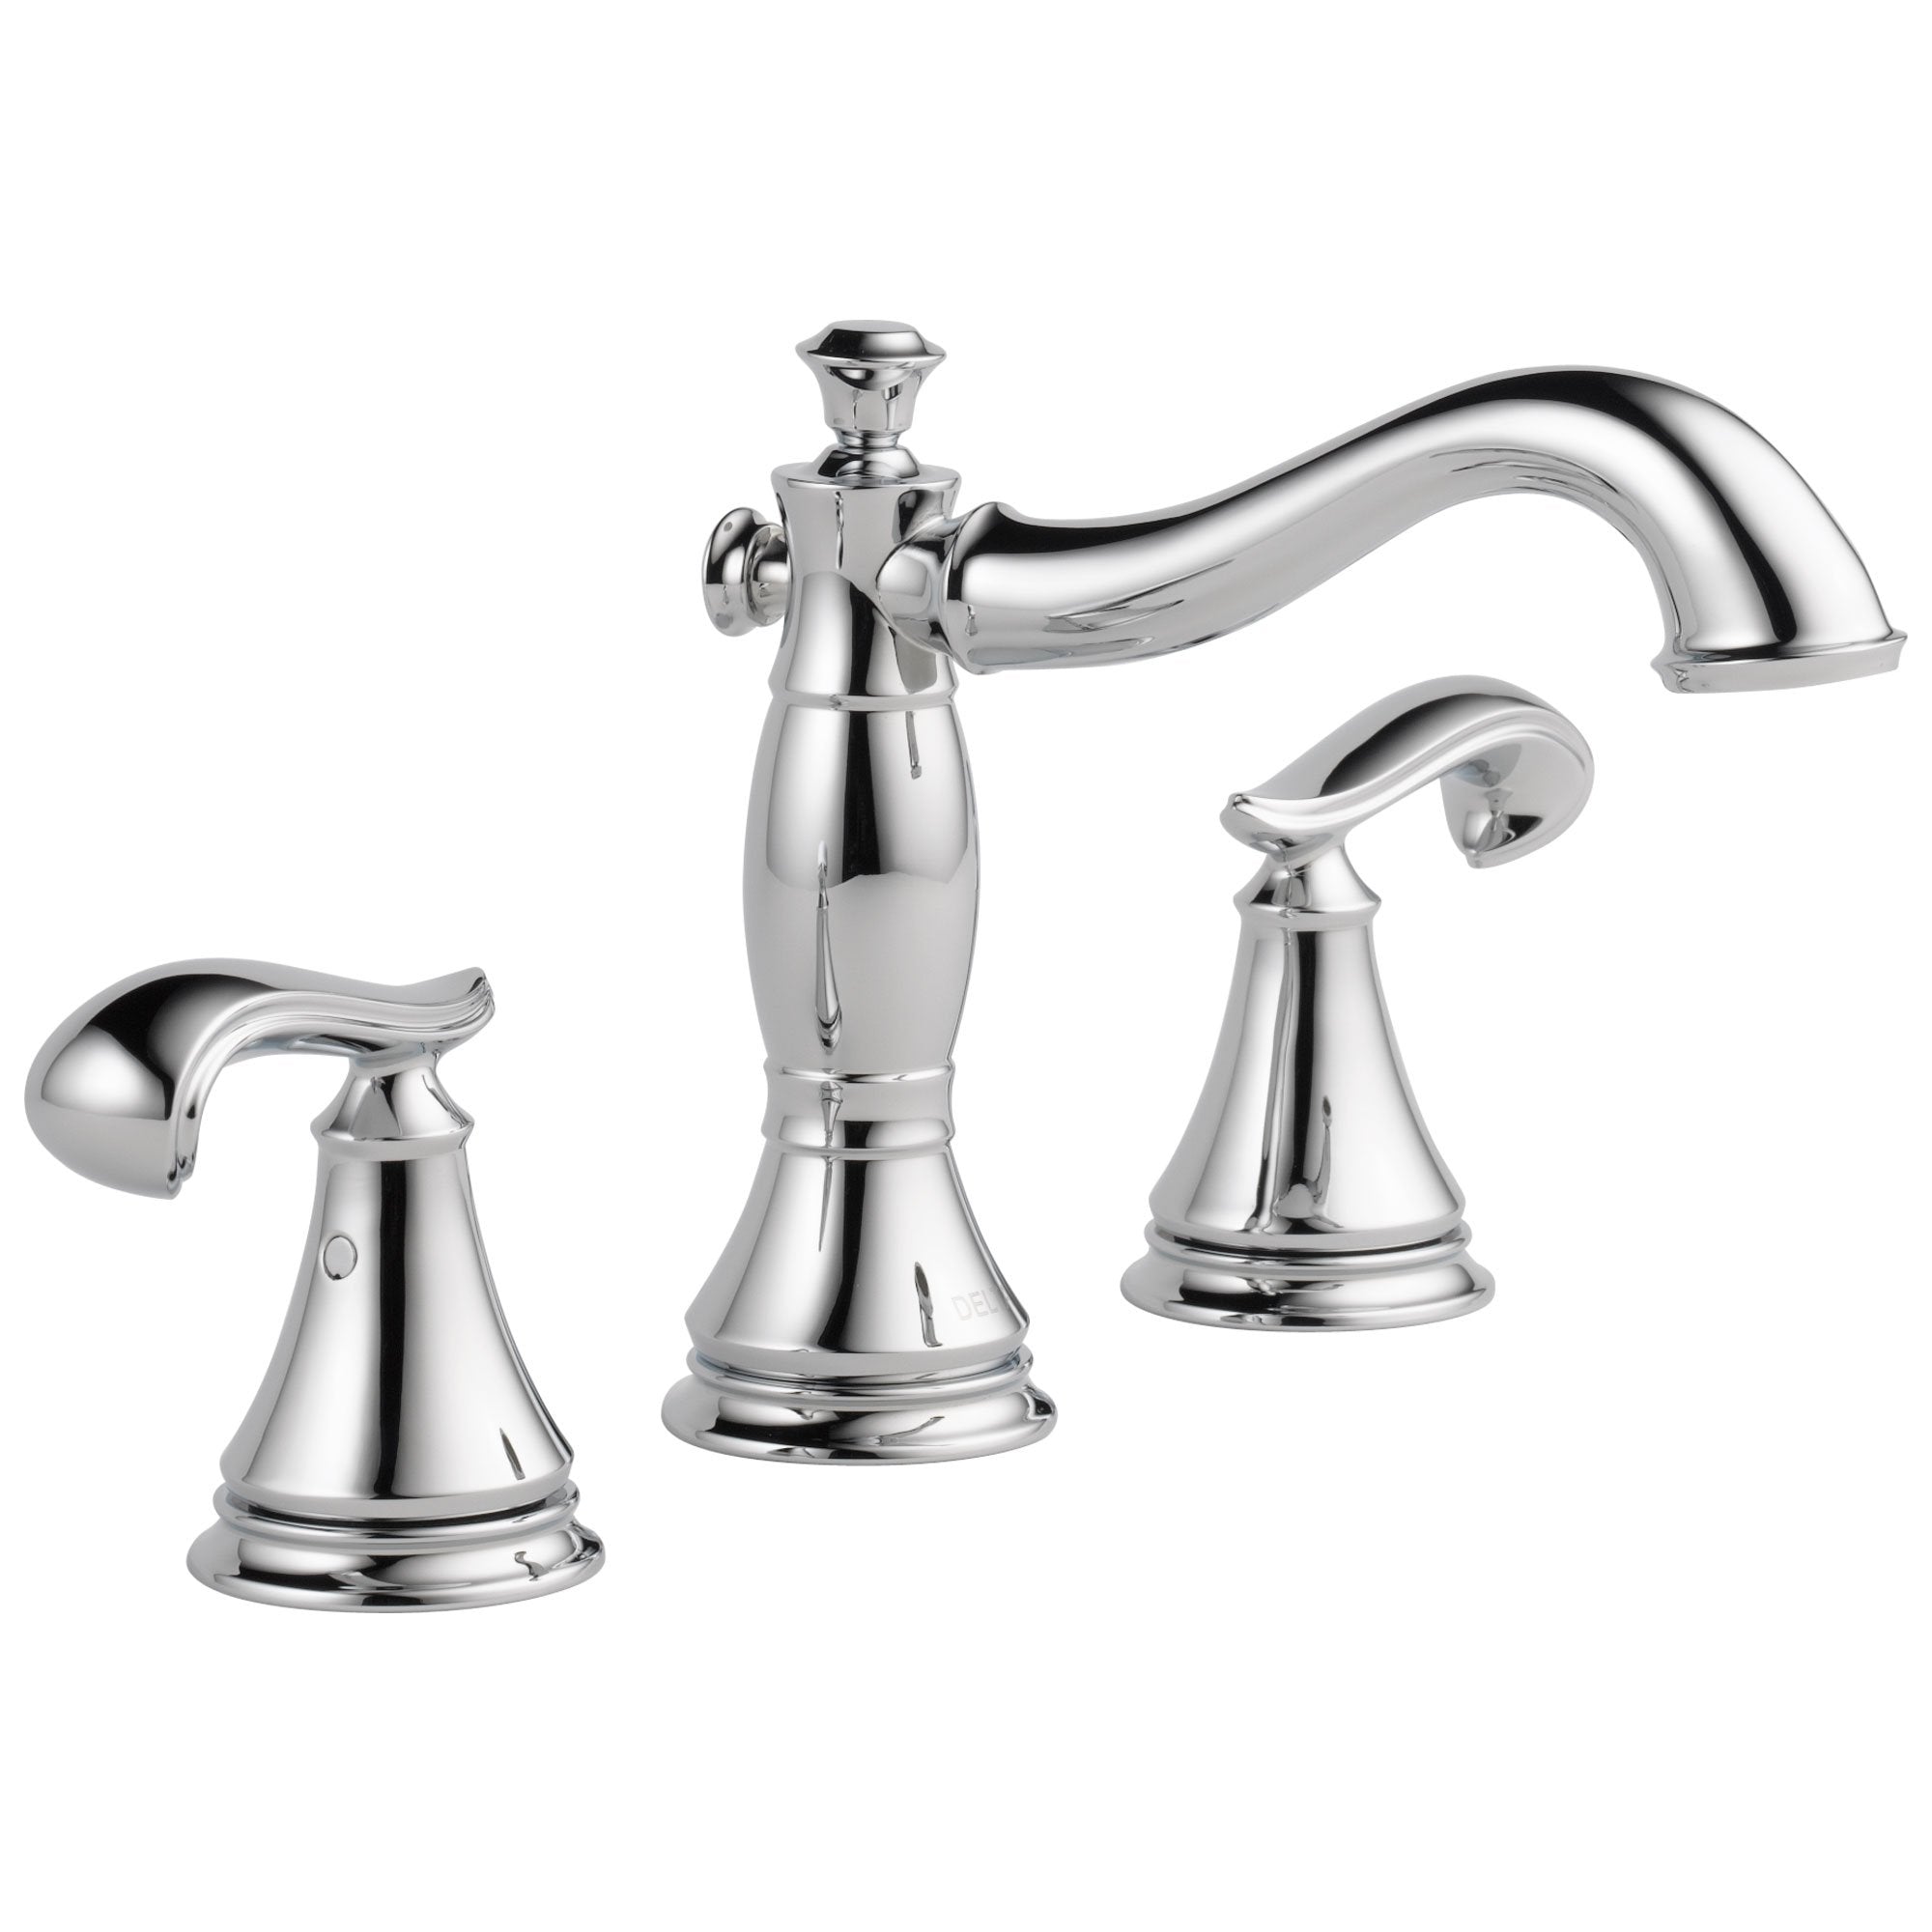 Delta Cassidy Collection Chrome Traditional Widespread Lavatory Bathroom Sink Faucet INCLUDES Two French Curve Lever Handles and Metal Pop-Up Drain D1782V